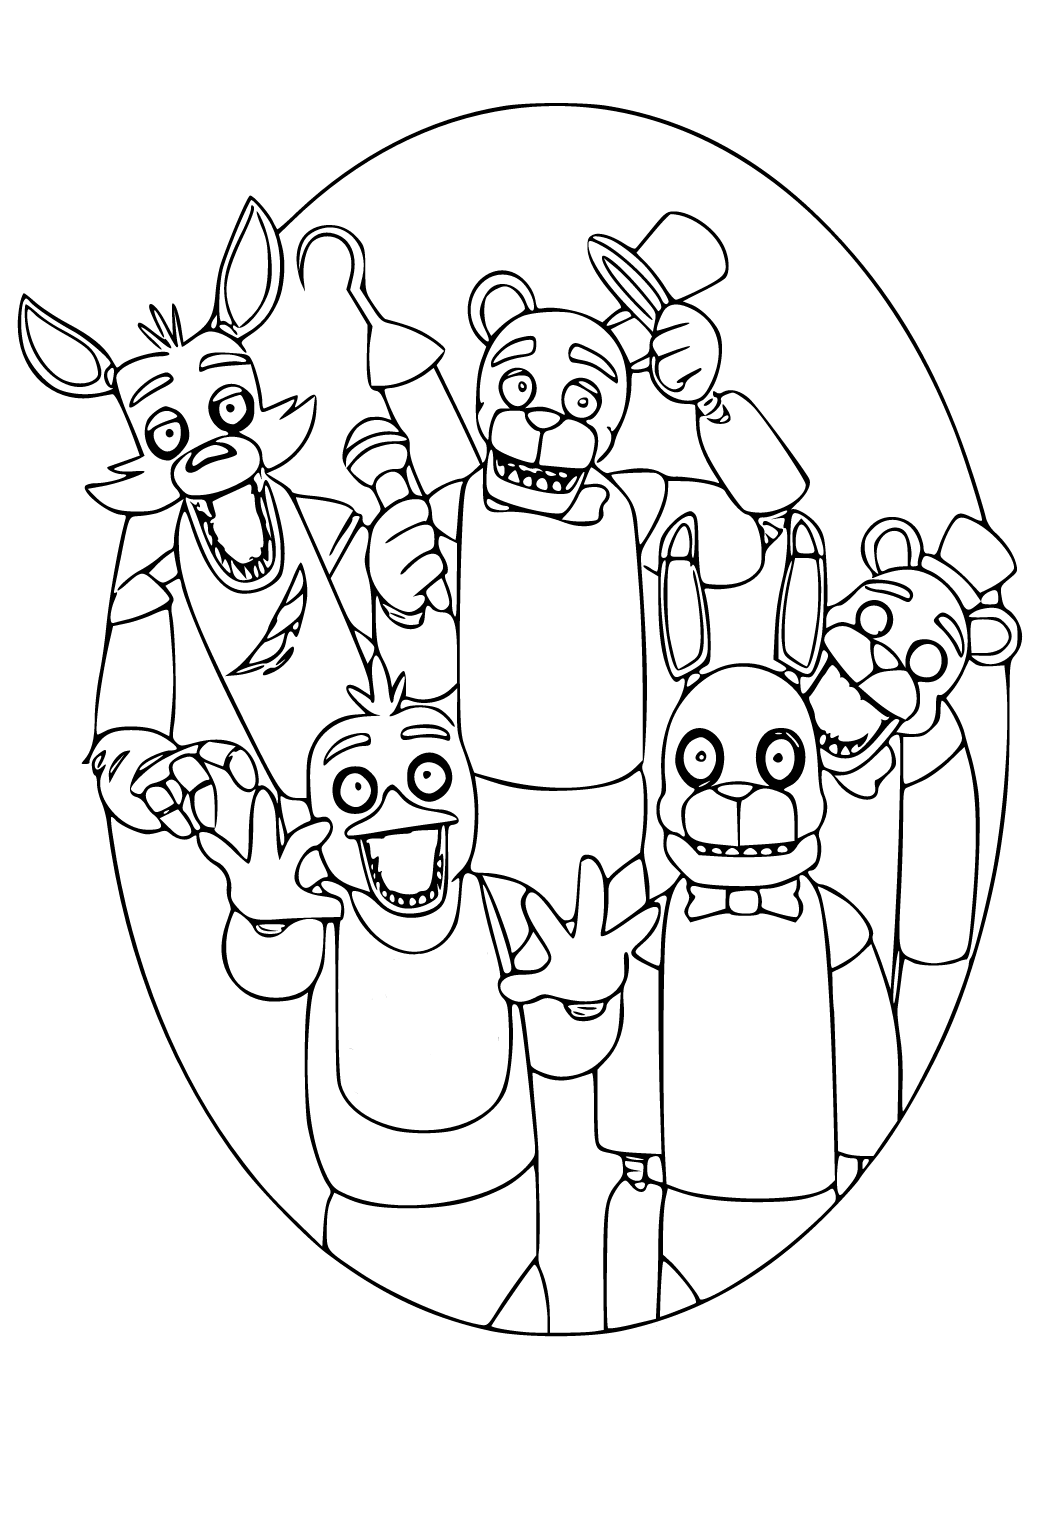 Free Coloring Pages To Print Five Nights At Freddys Coloring Pages